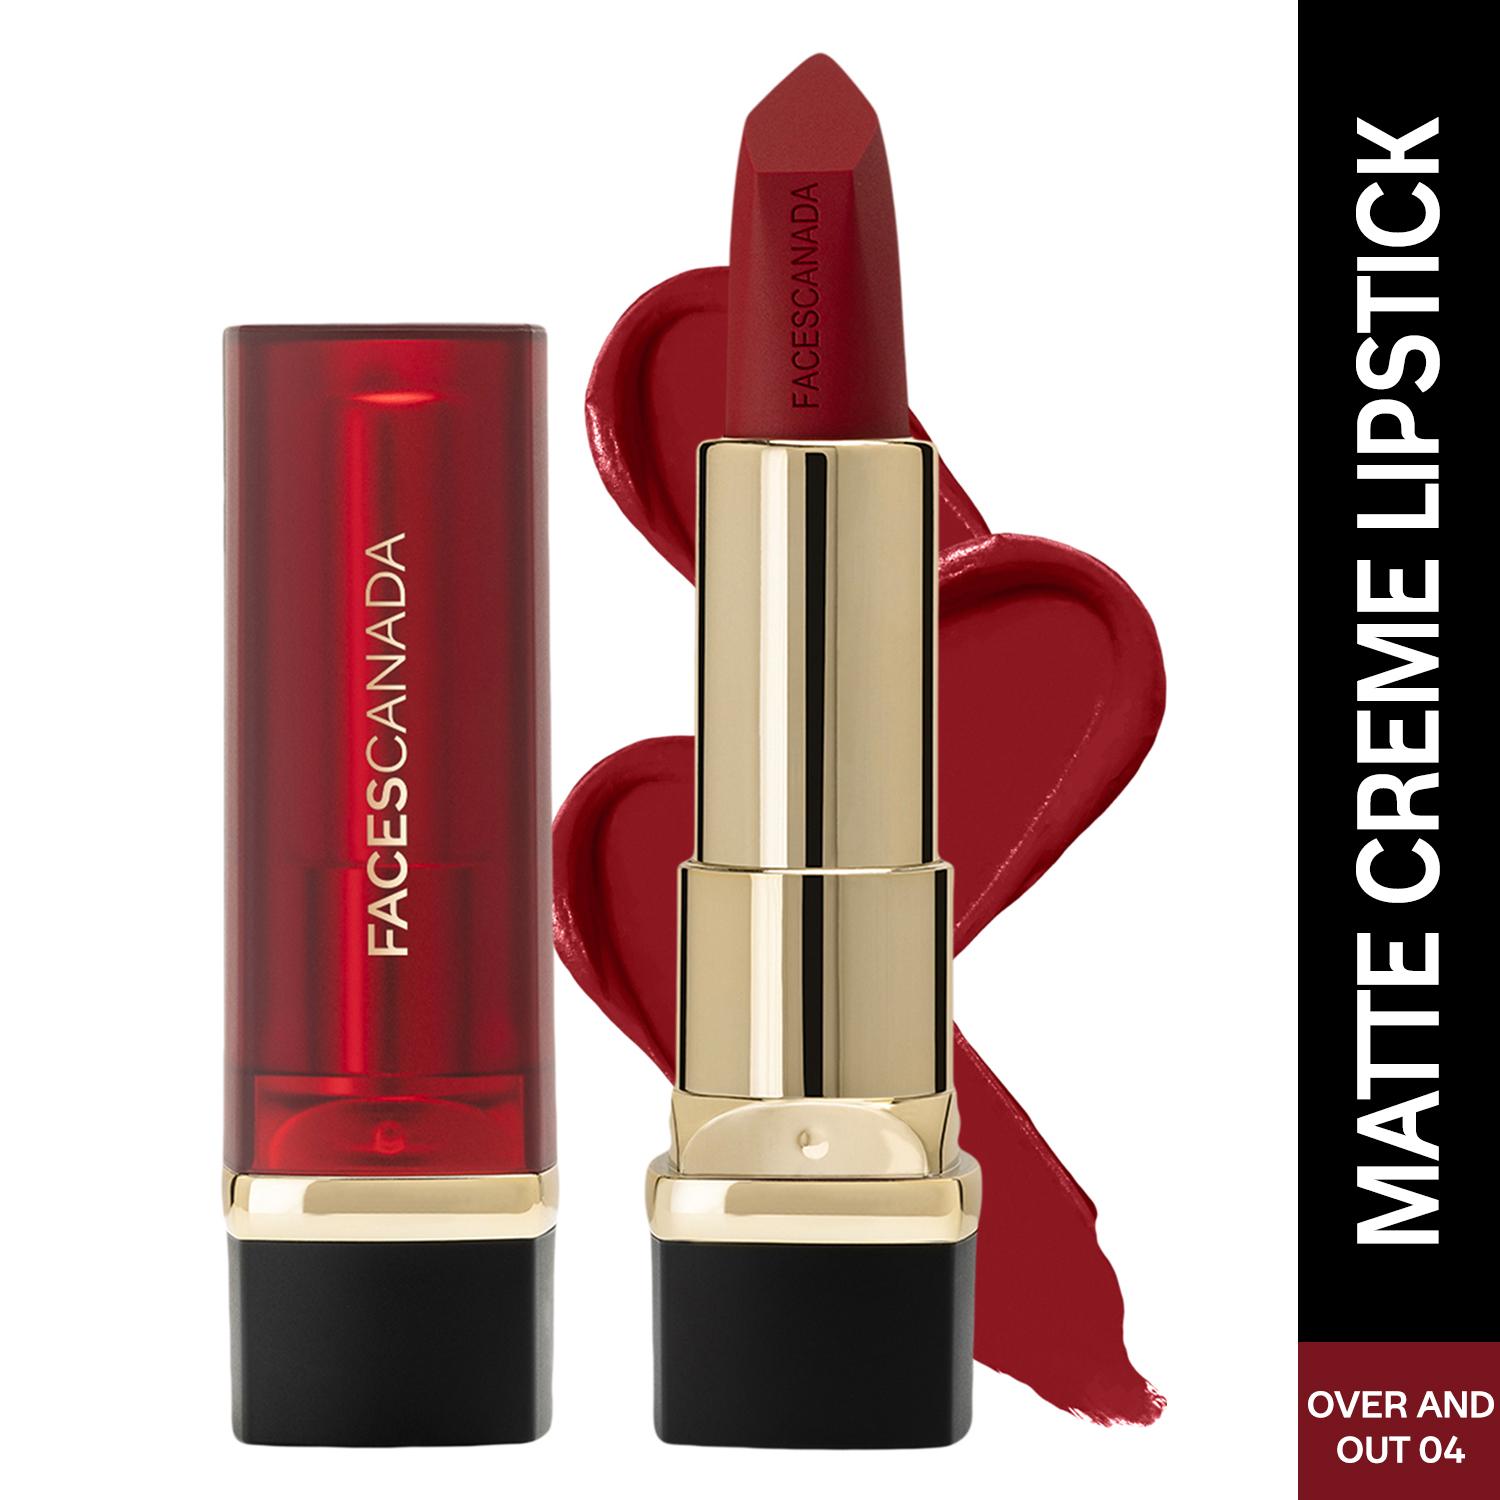 Faces Canada | Faces Canada Comfy Matte Crème Lipstick, 8HR Long Stay, Intense Color - Over And Out 04 (4.2 g)